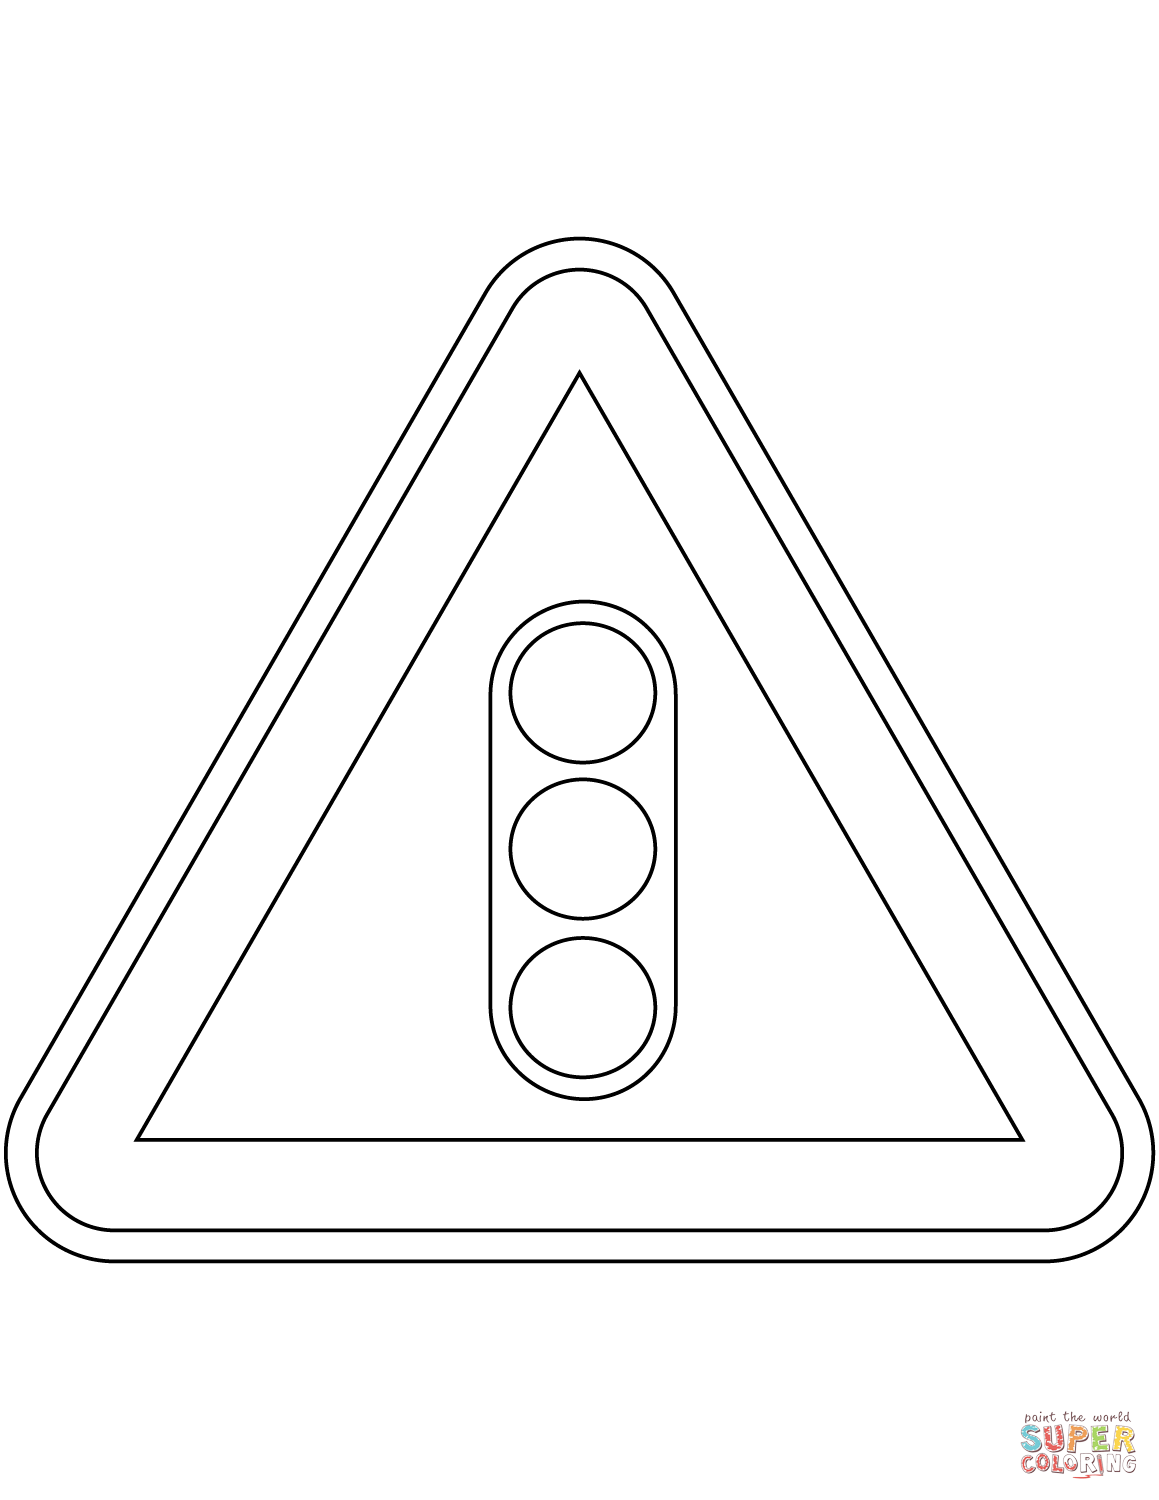 Traffic signals ahead sign in portugal coloring page free printable coloring pages